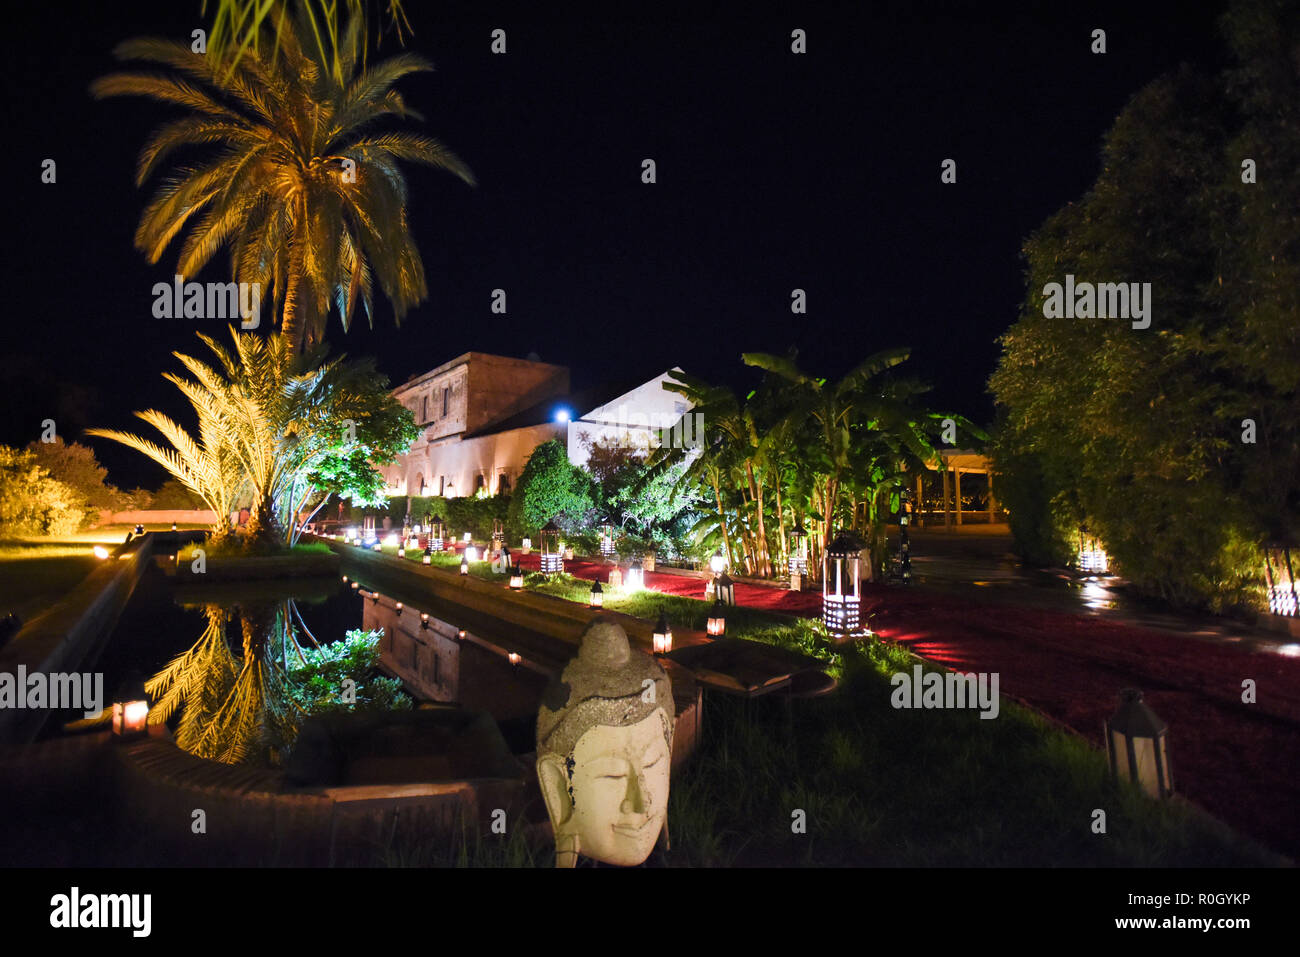 Exterior view of a five star hotel by night in  Tensift al haouz in Marrakesh Morocco Stock Photo